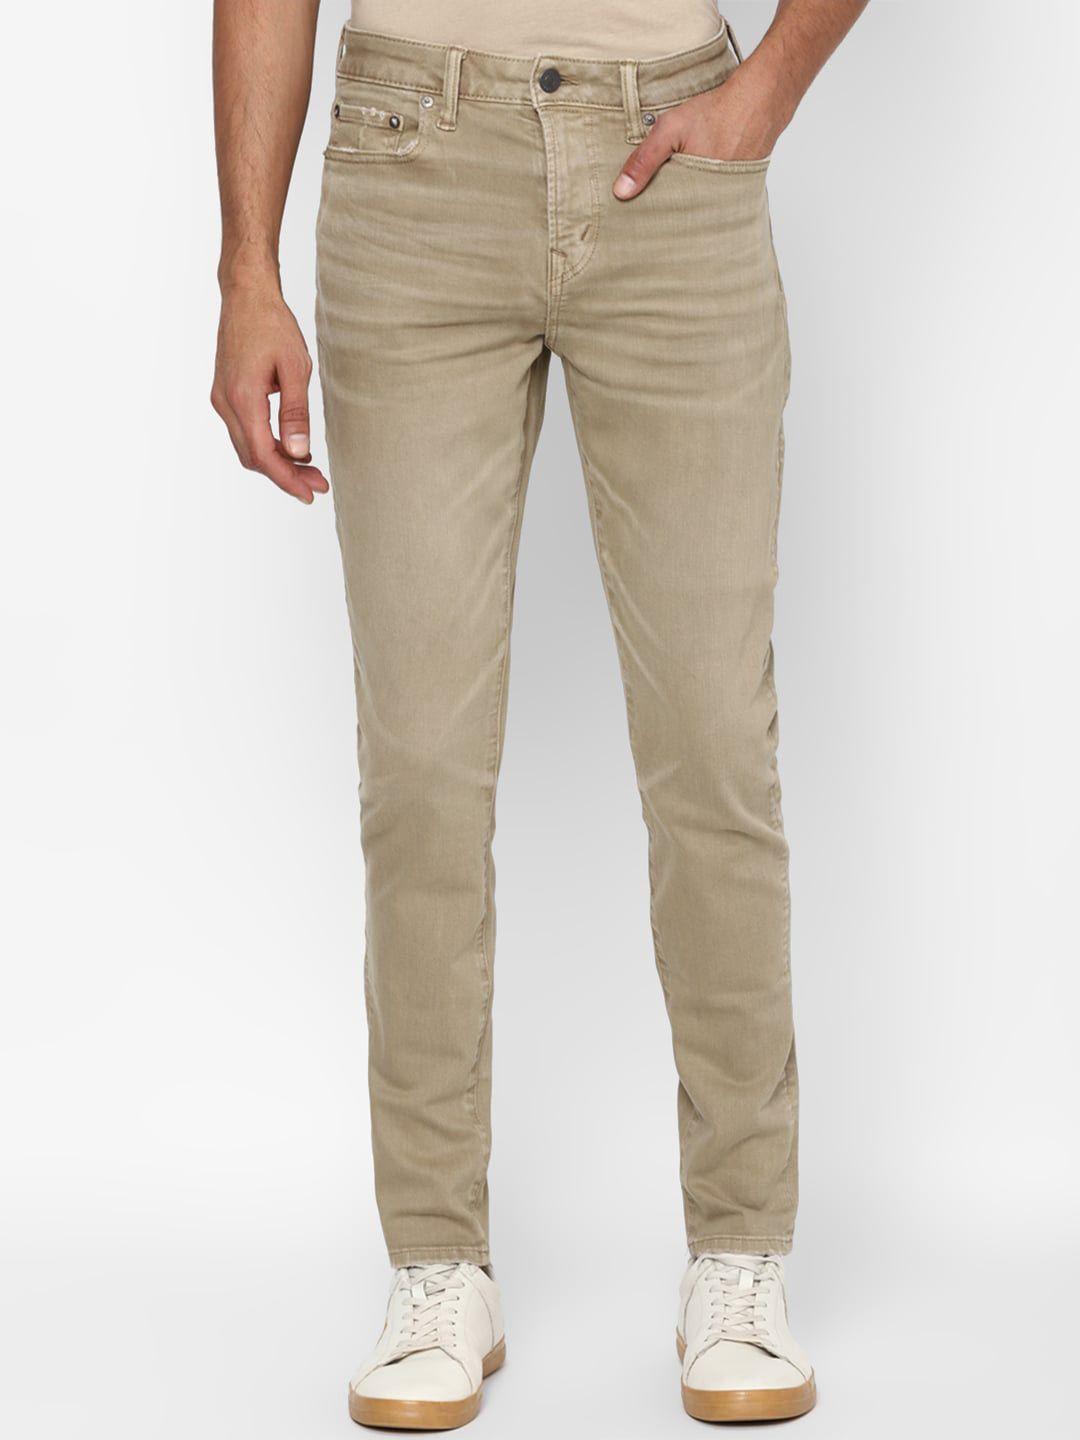 american-eagle-outfitters-men-solid-slim-fit-light-fade-jeans